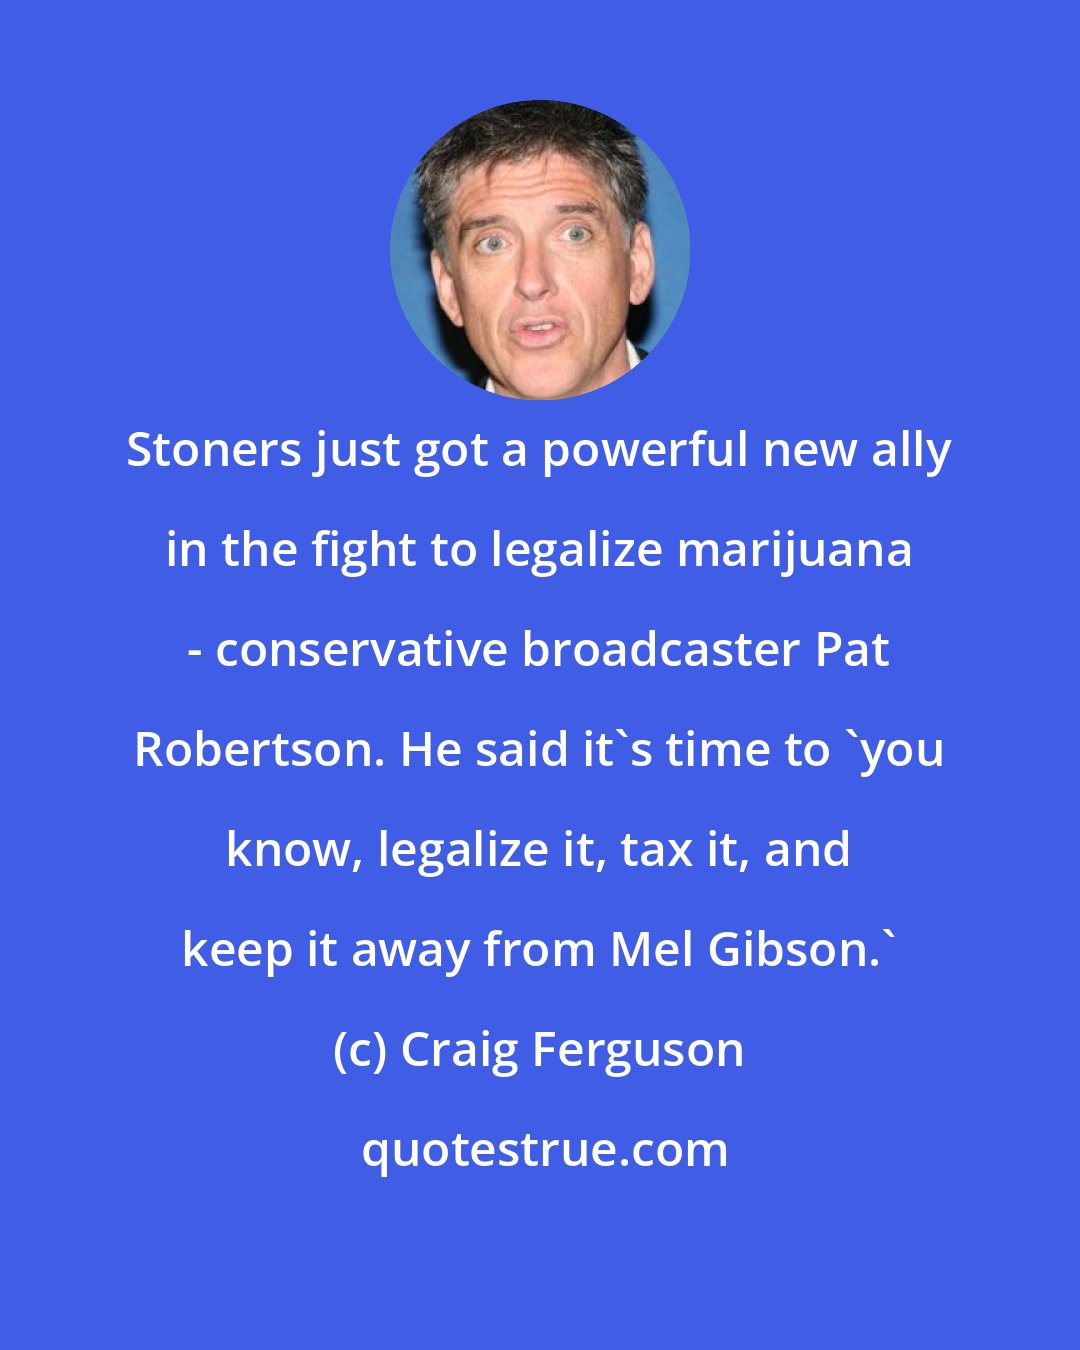 Craig Ferguson: Stoners just got a powerful new ally in the fight to legalize marijuana - conservative broadcaster Pat Robertson. He said it's time to 'you know, legalize it, tax it, and keep it away from Mel Gibson.'